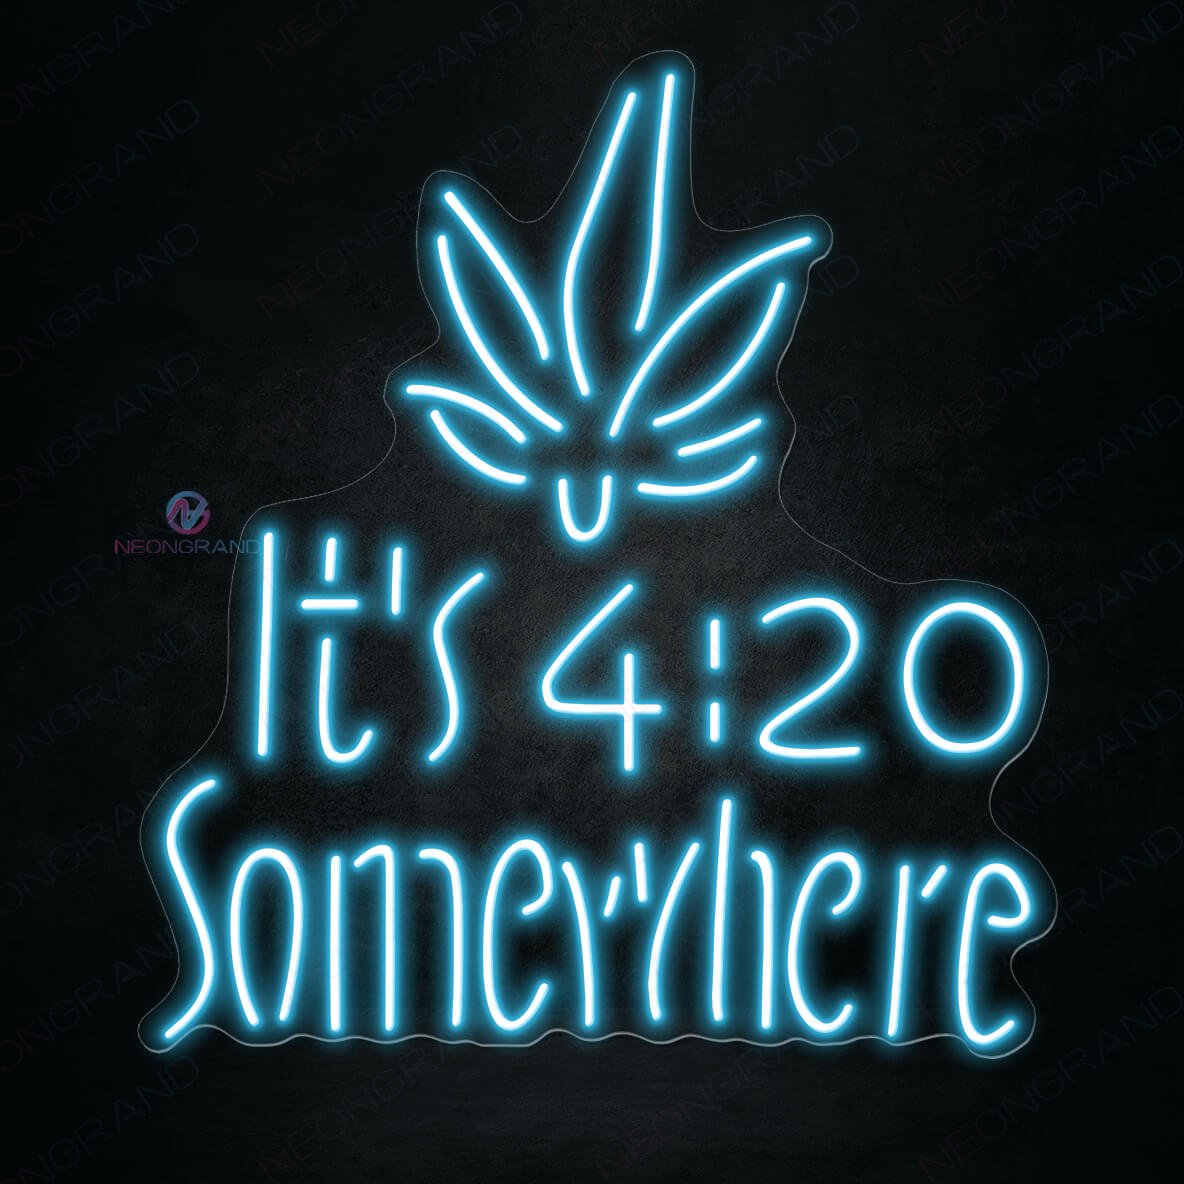 Its 420 Somewhere Neon Sign Weed Led Light light blue